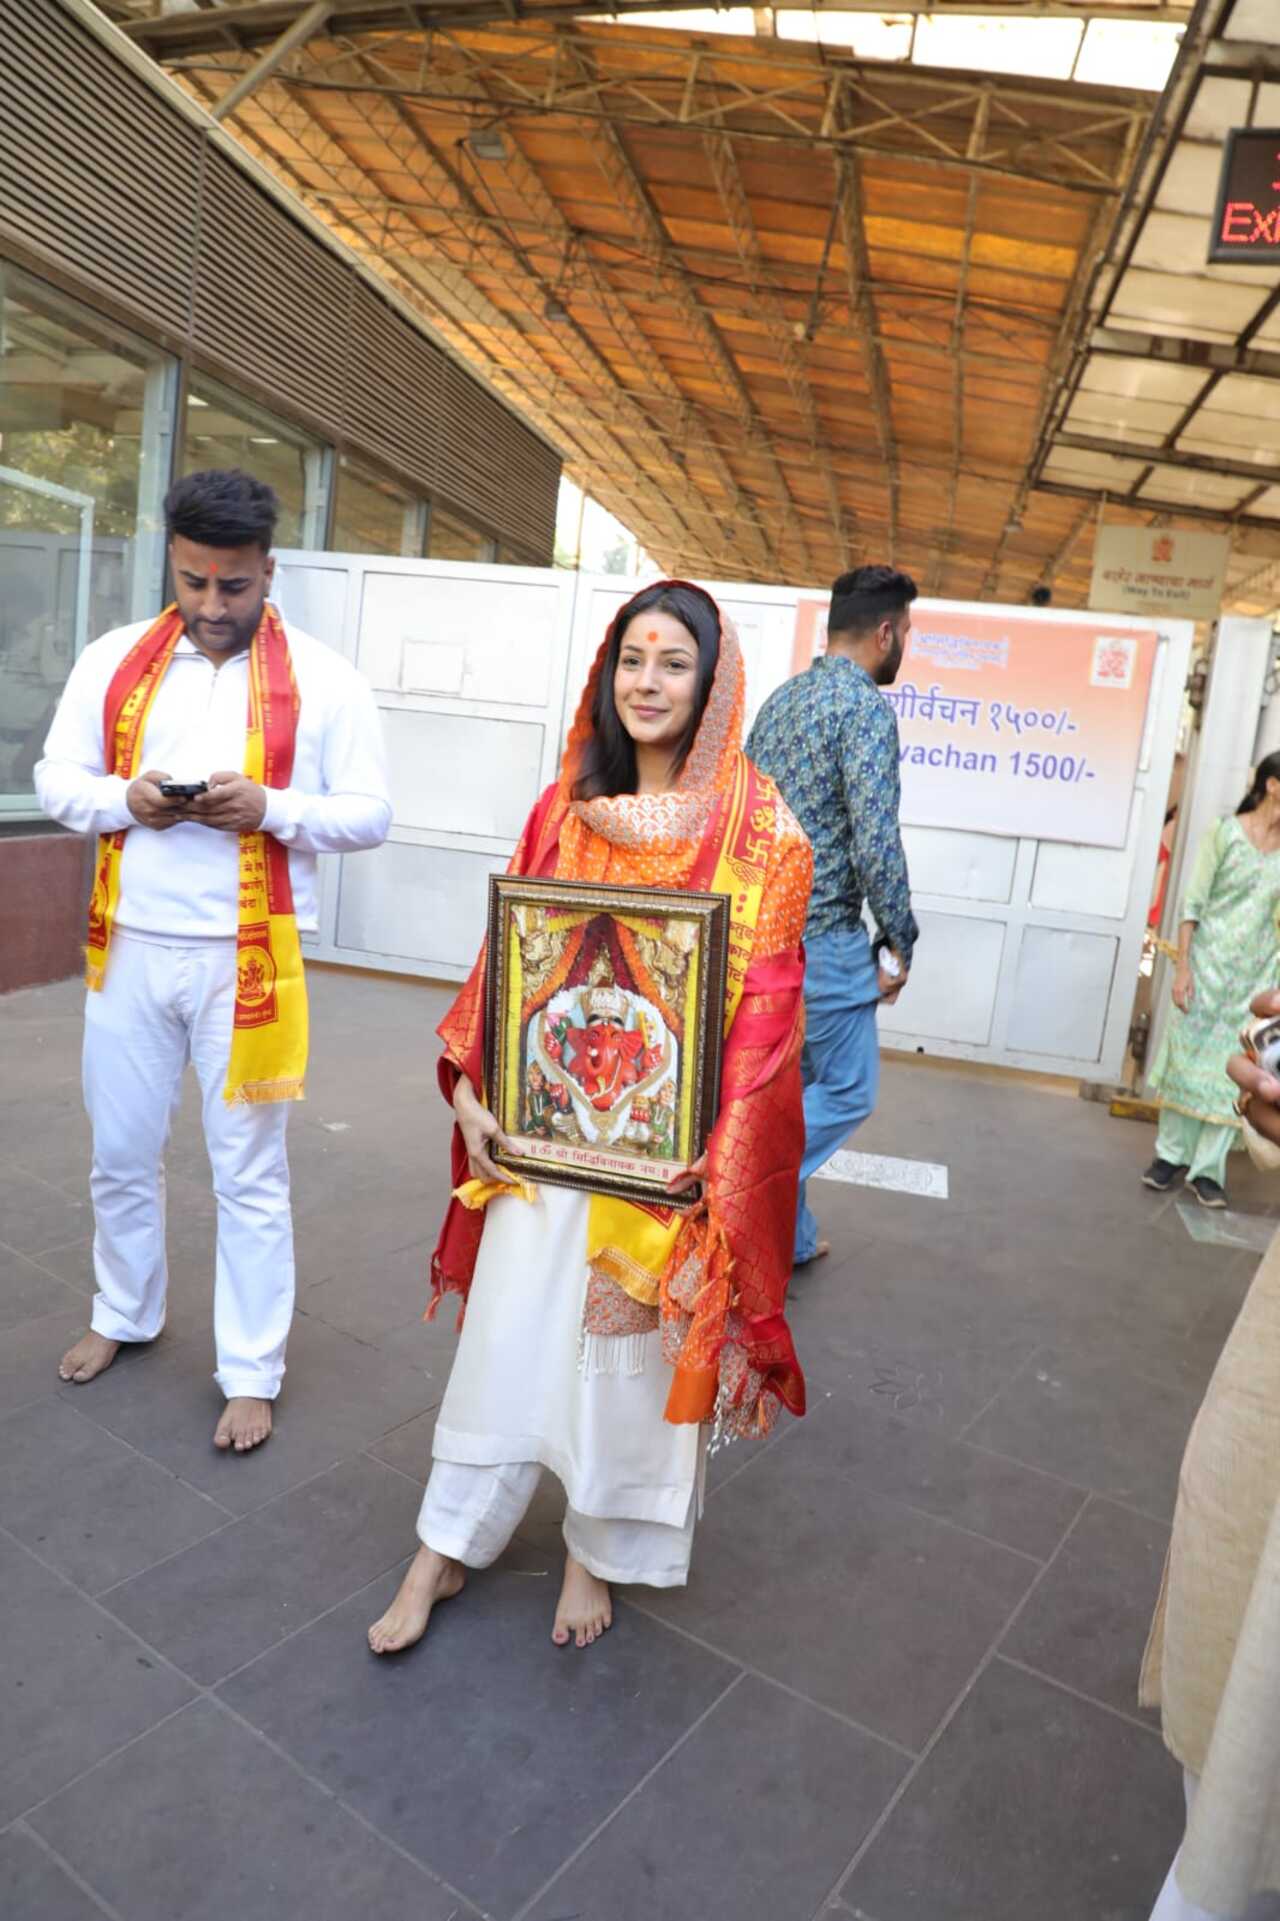 Shehnaaz Gill sought blessings of the Lord at Siddhivinayak temple